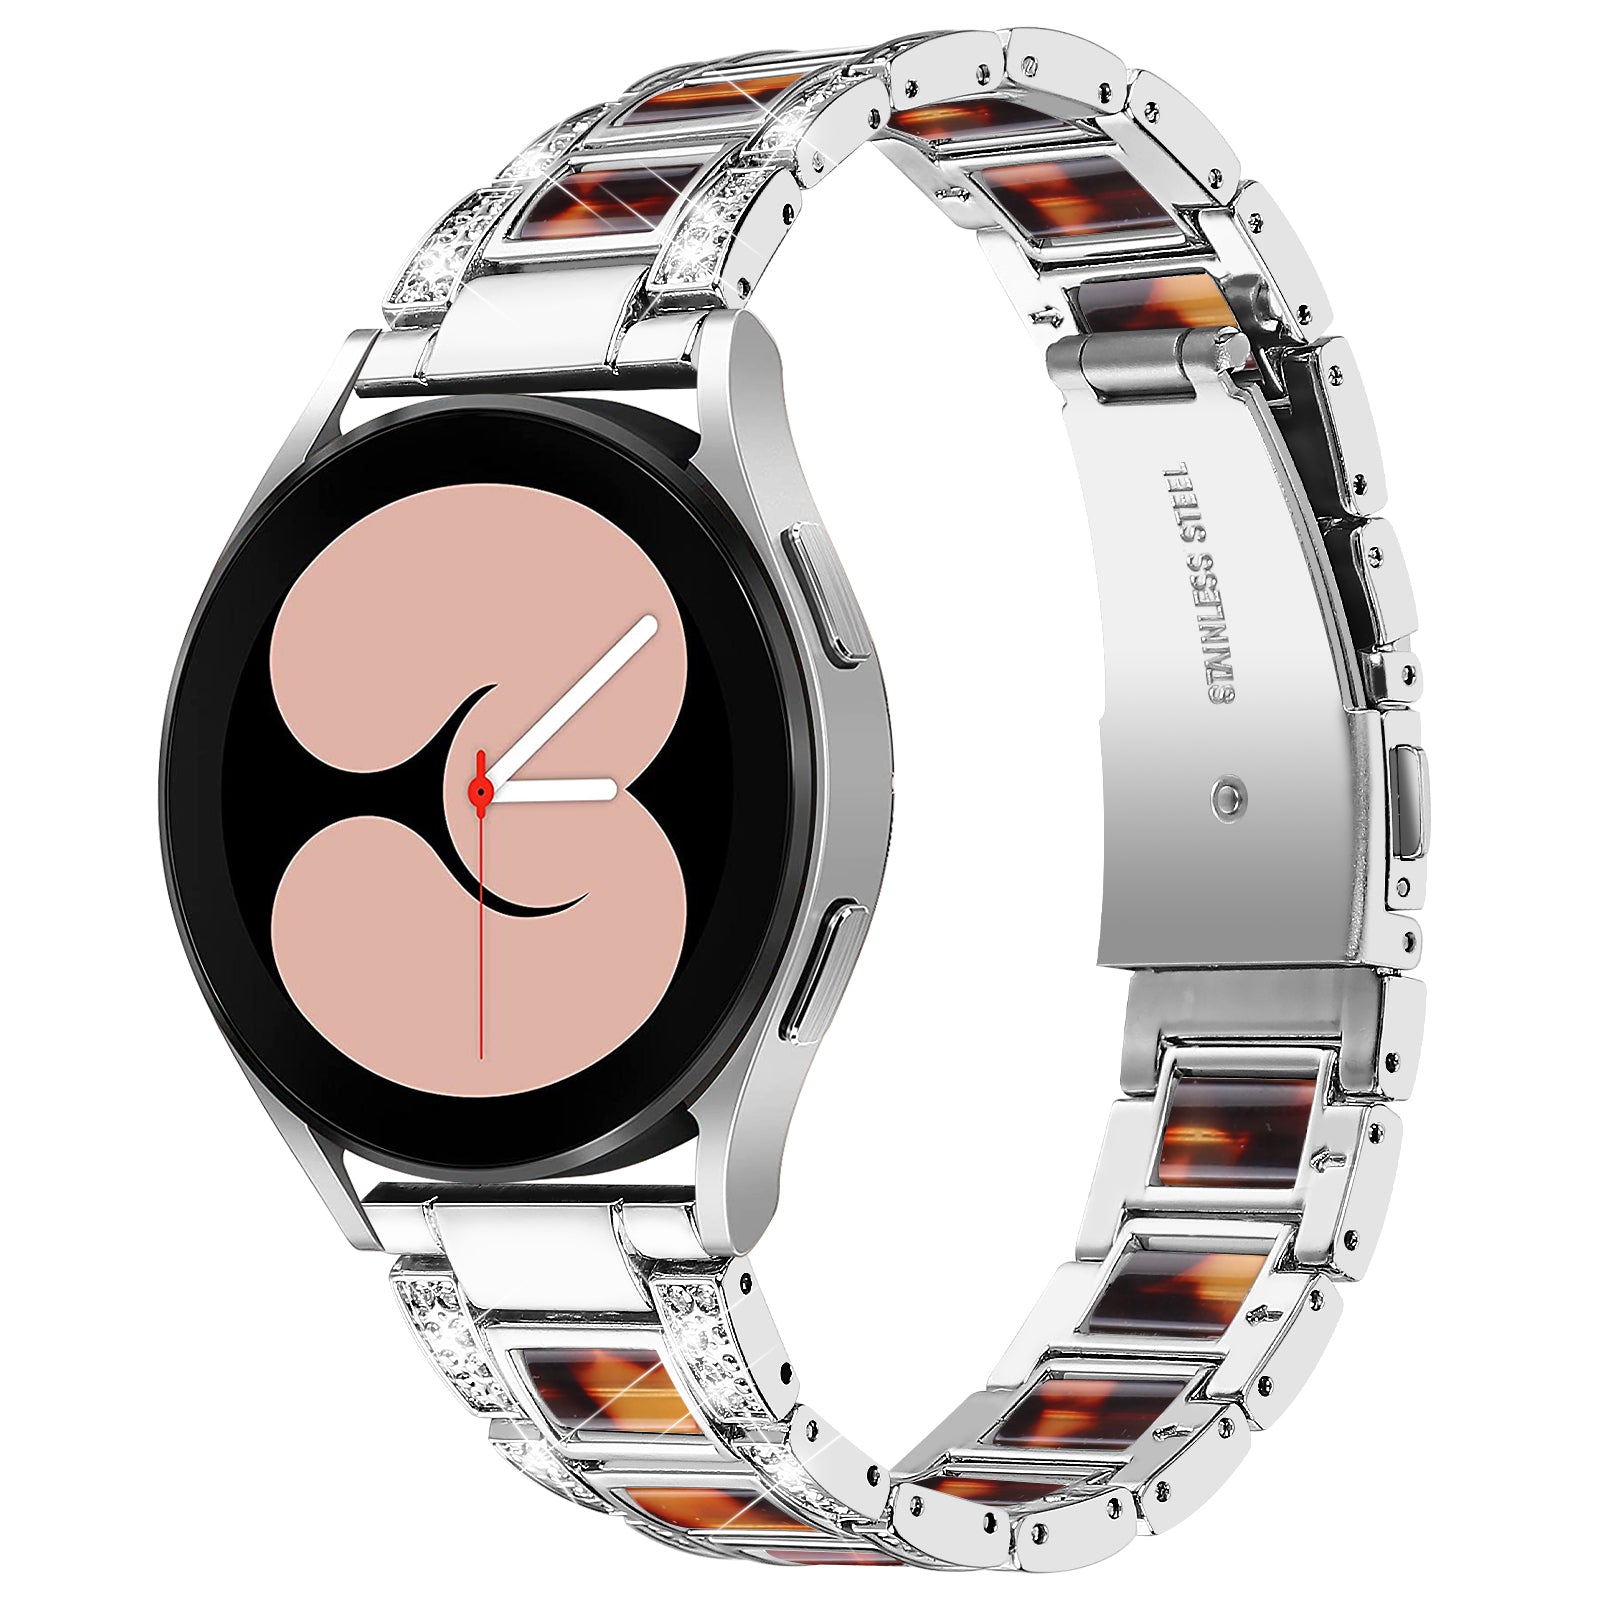 For Samsung Galaxy Watch4 Active 40mm/44mm/Watch4 Classic 42mm/46mm Stylish Rhinestone Decor Stainless Steel Resin Watch Band Wrist Strap - Silver/Tortoiseshell Color